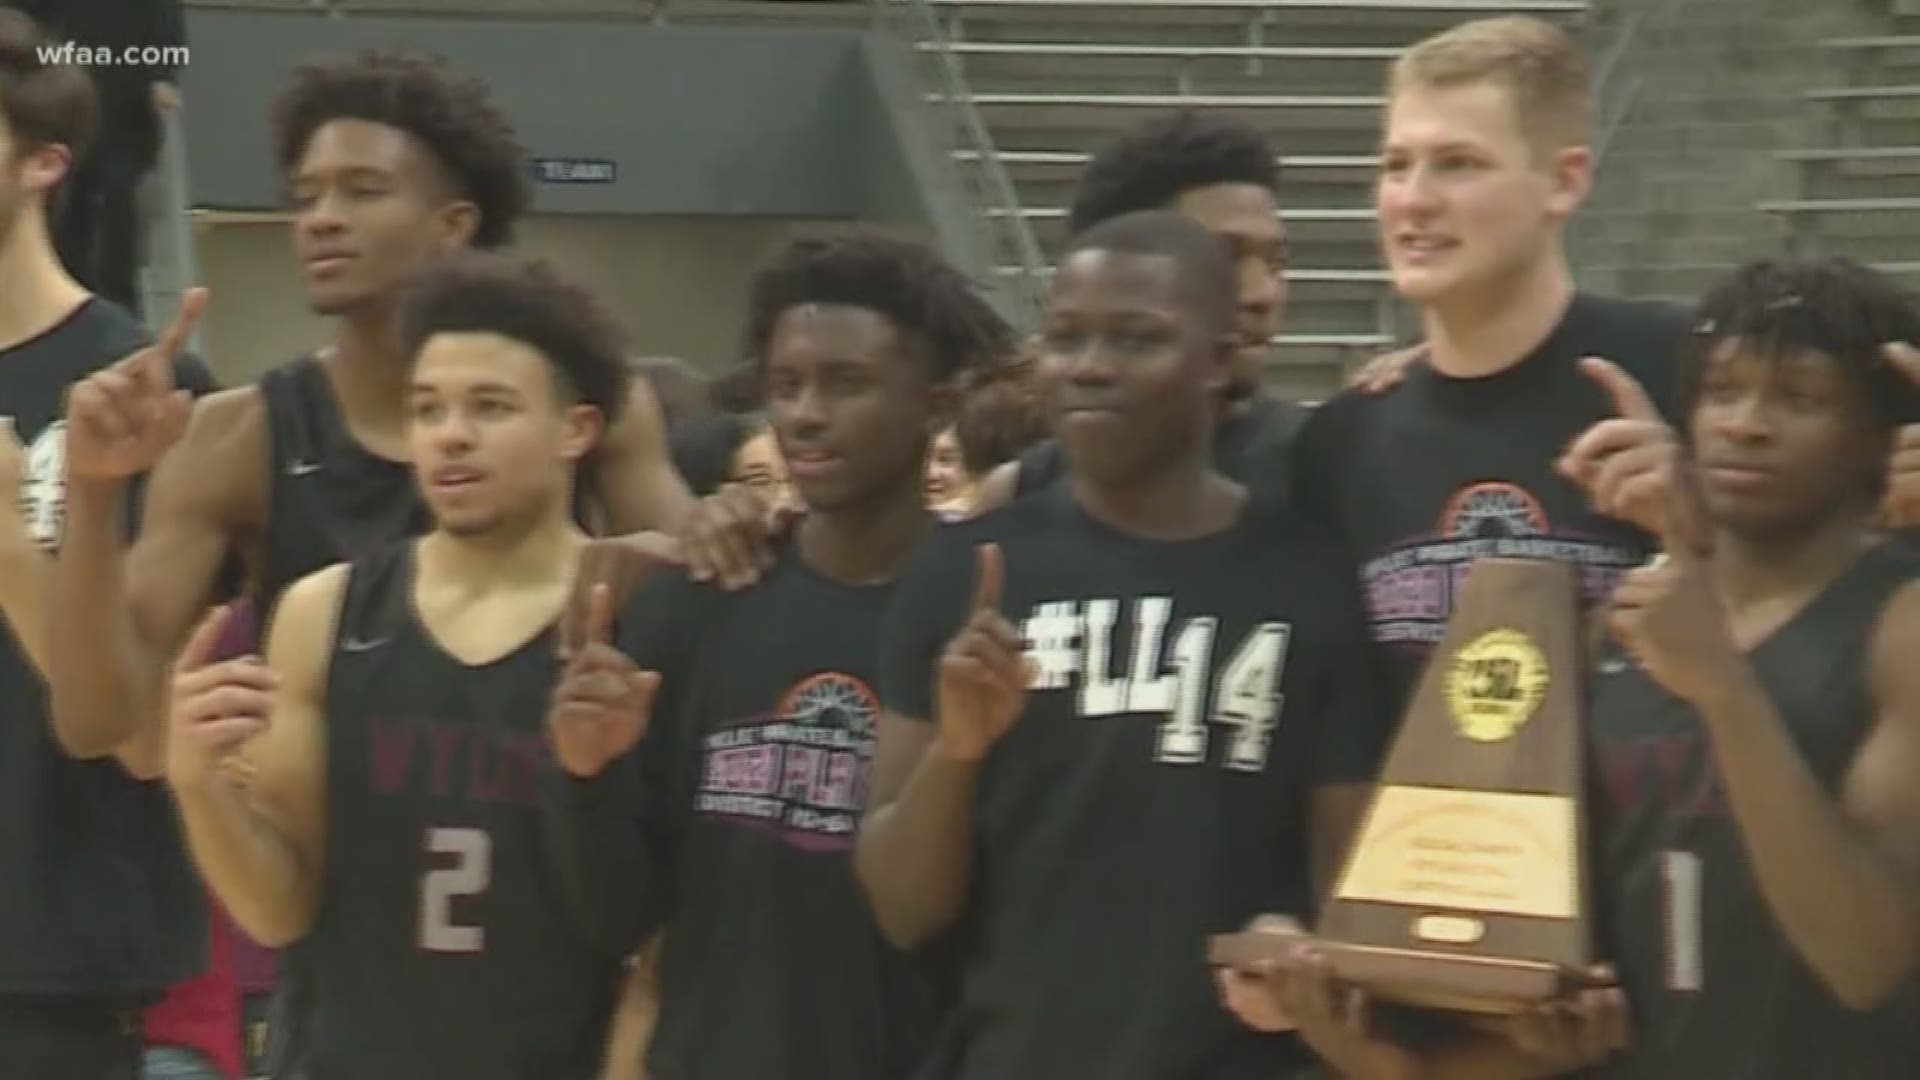 The Best HS Basketball Team in Texas Doesn't Need a State Title